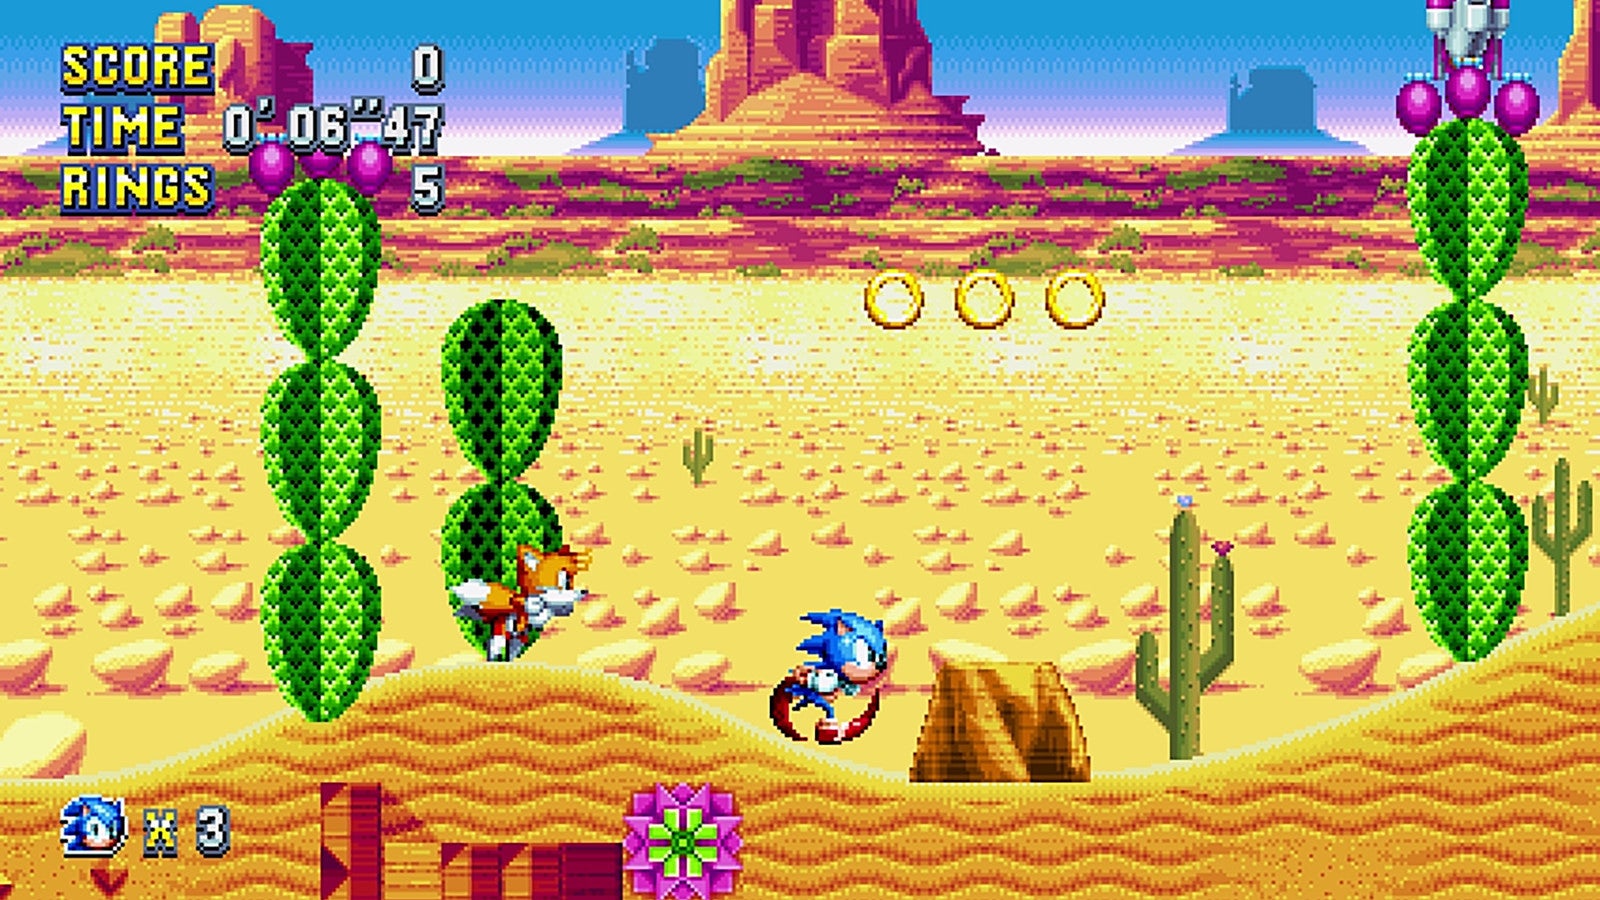 Sonic and Tails in desert level of Sonic Mania game.